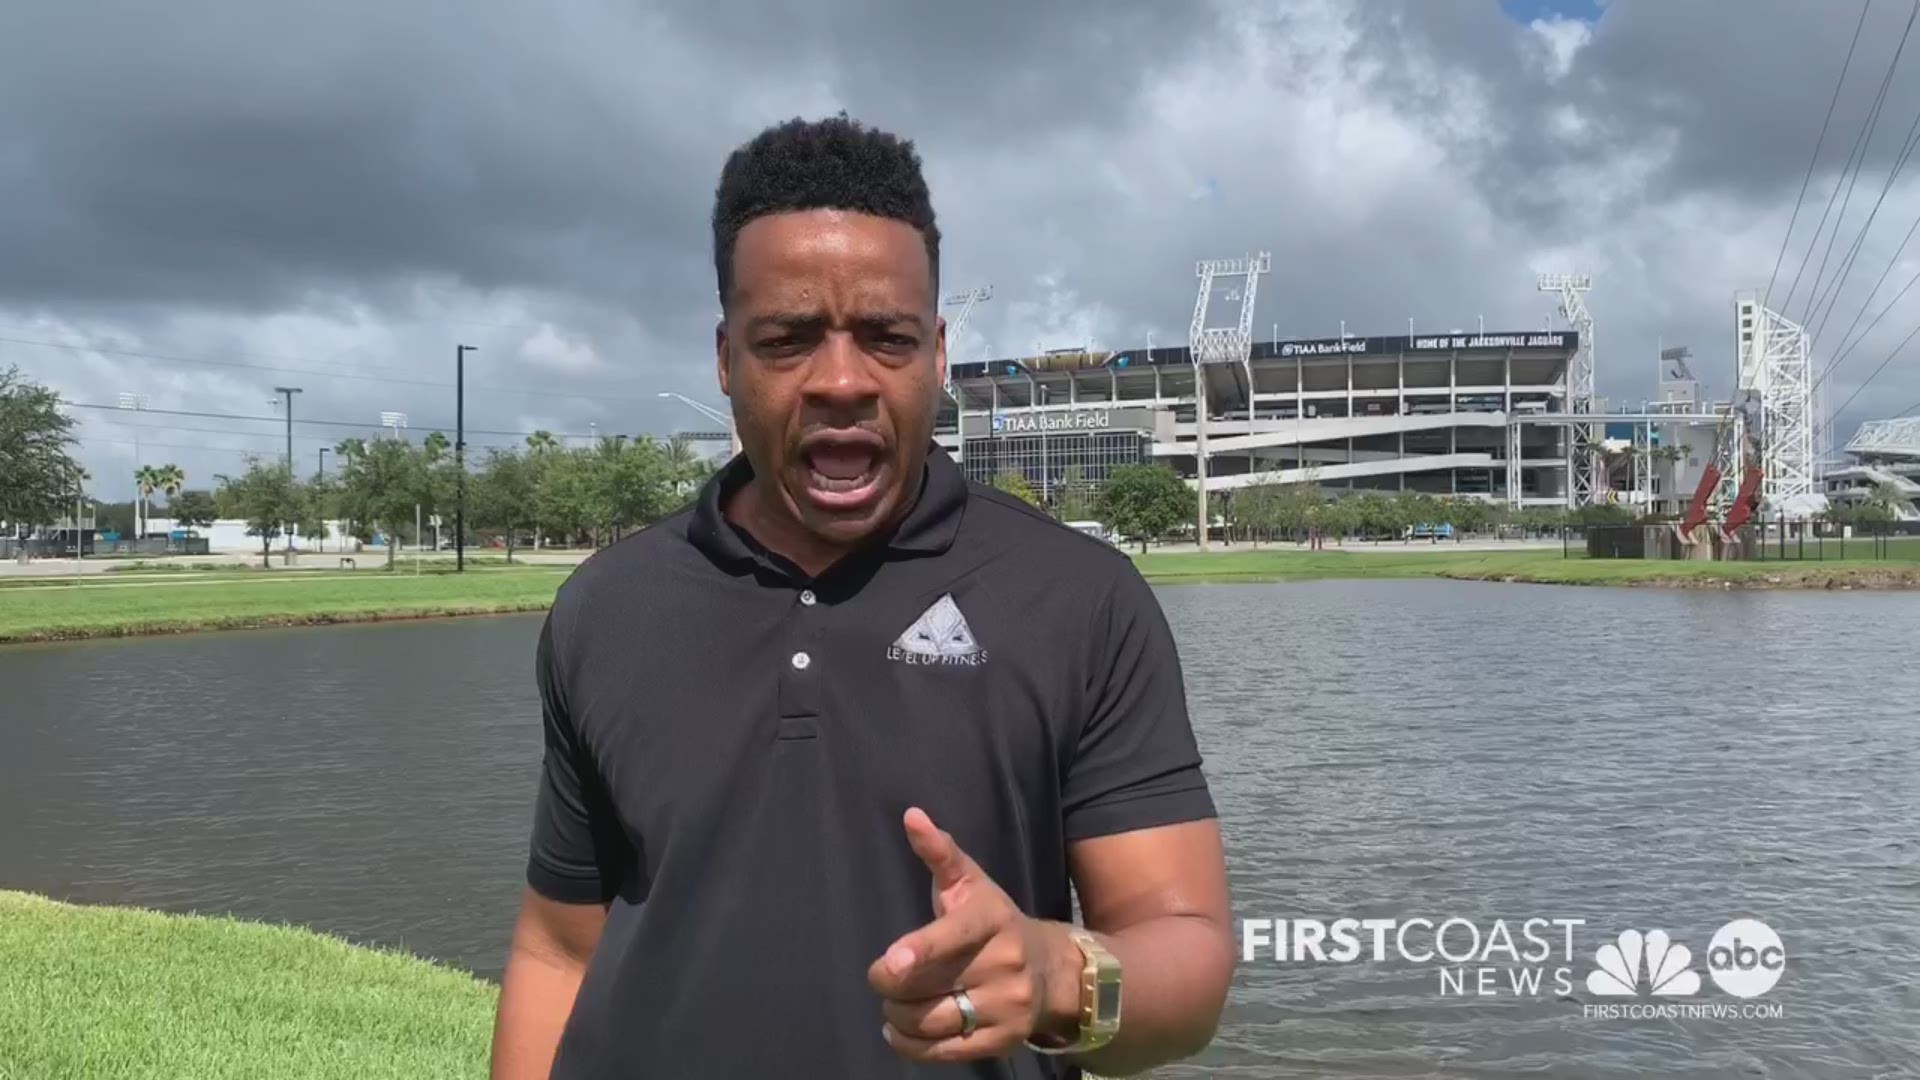 The Jacksonville Jaguars are putting its players' safety first ahead of Hurricane Dorian.